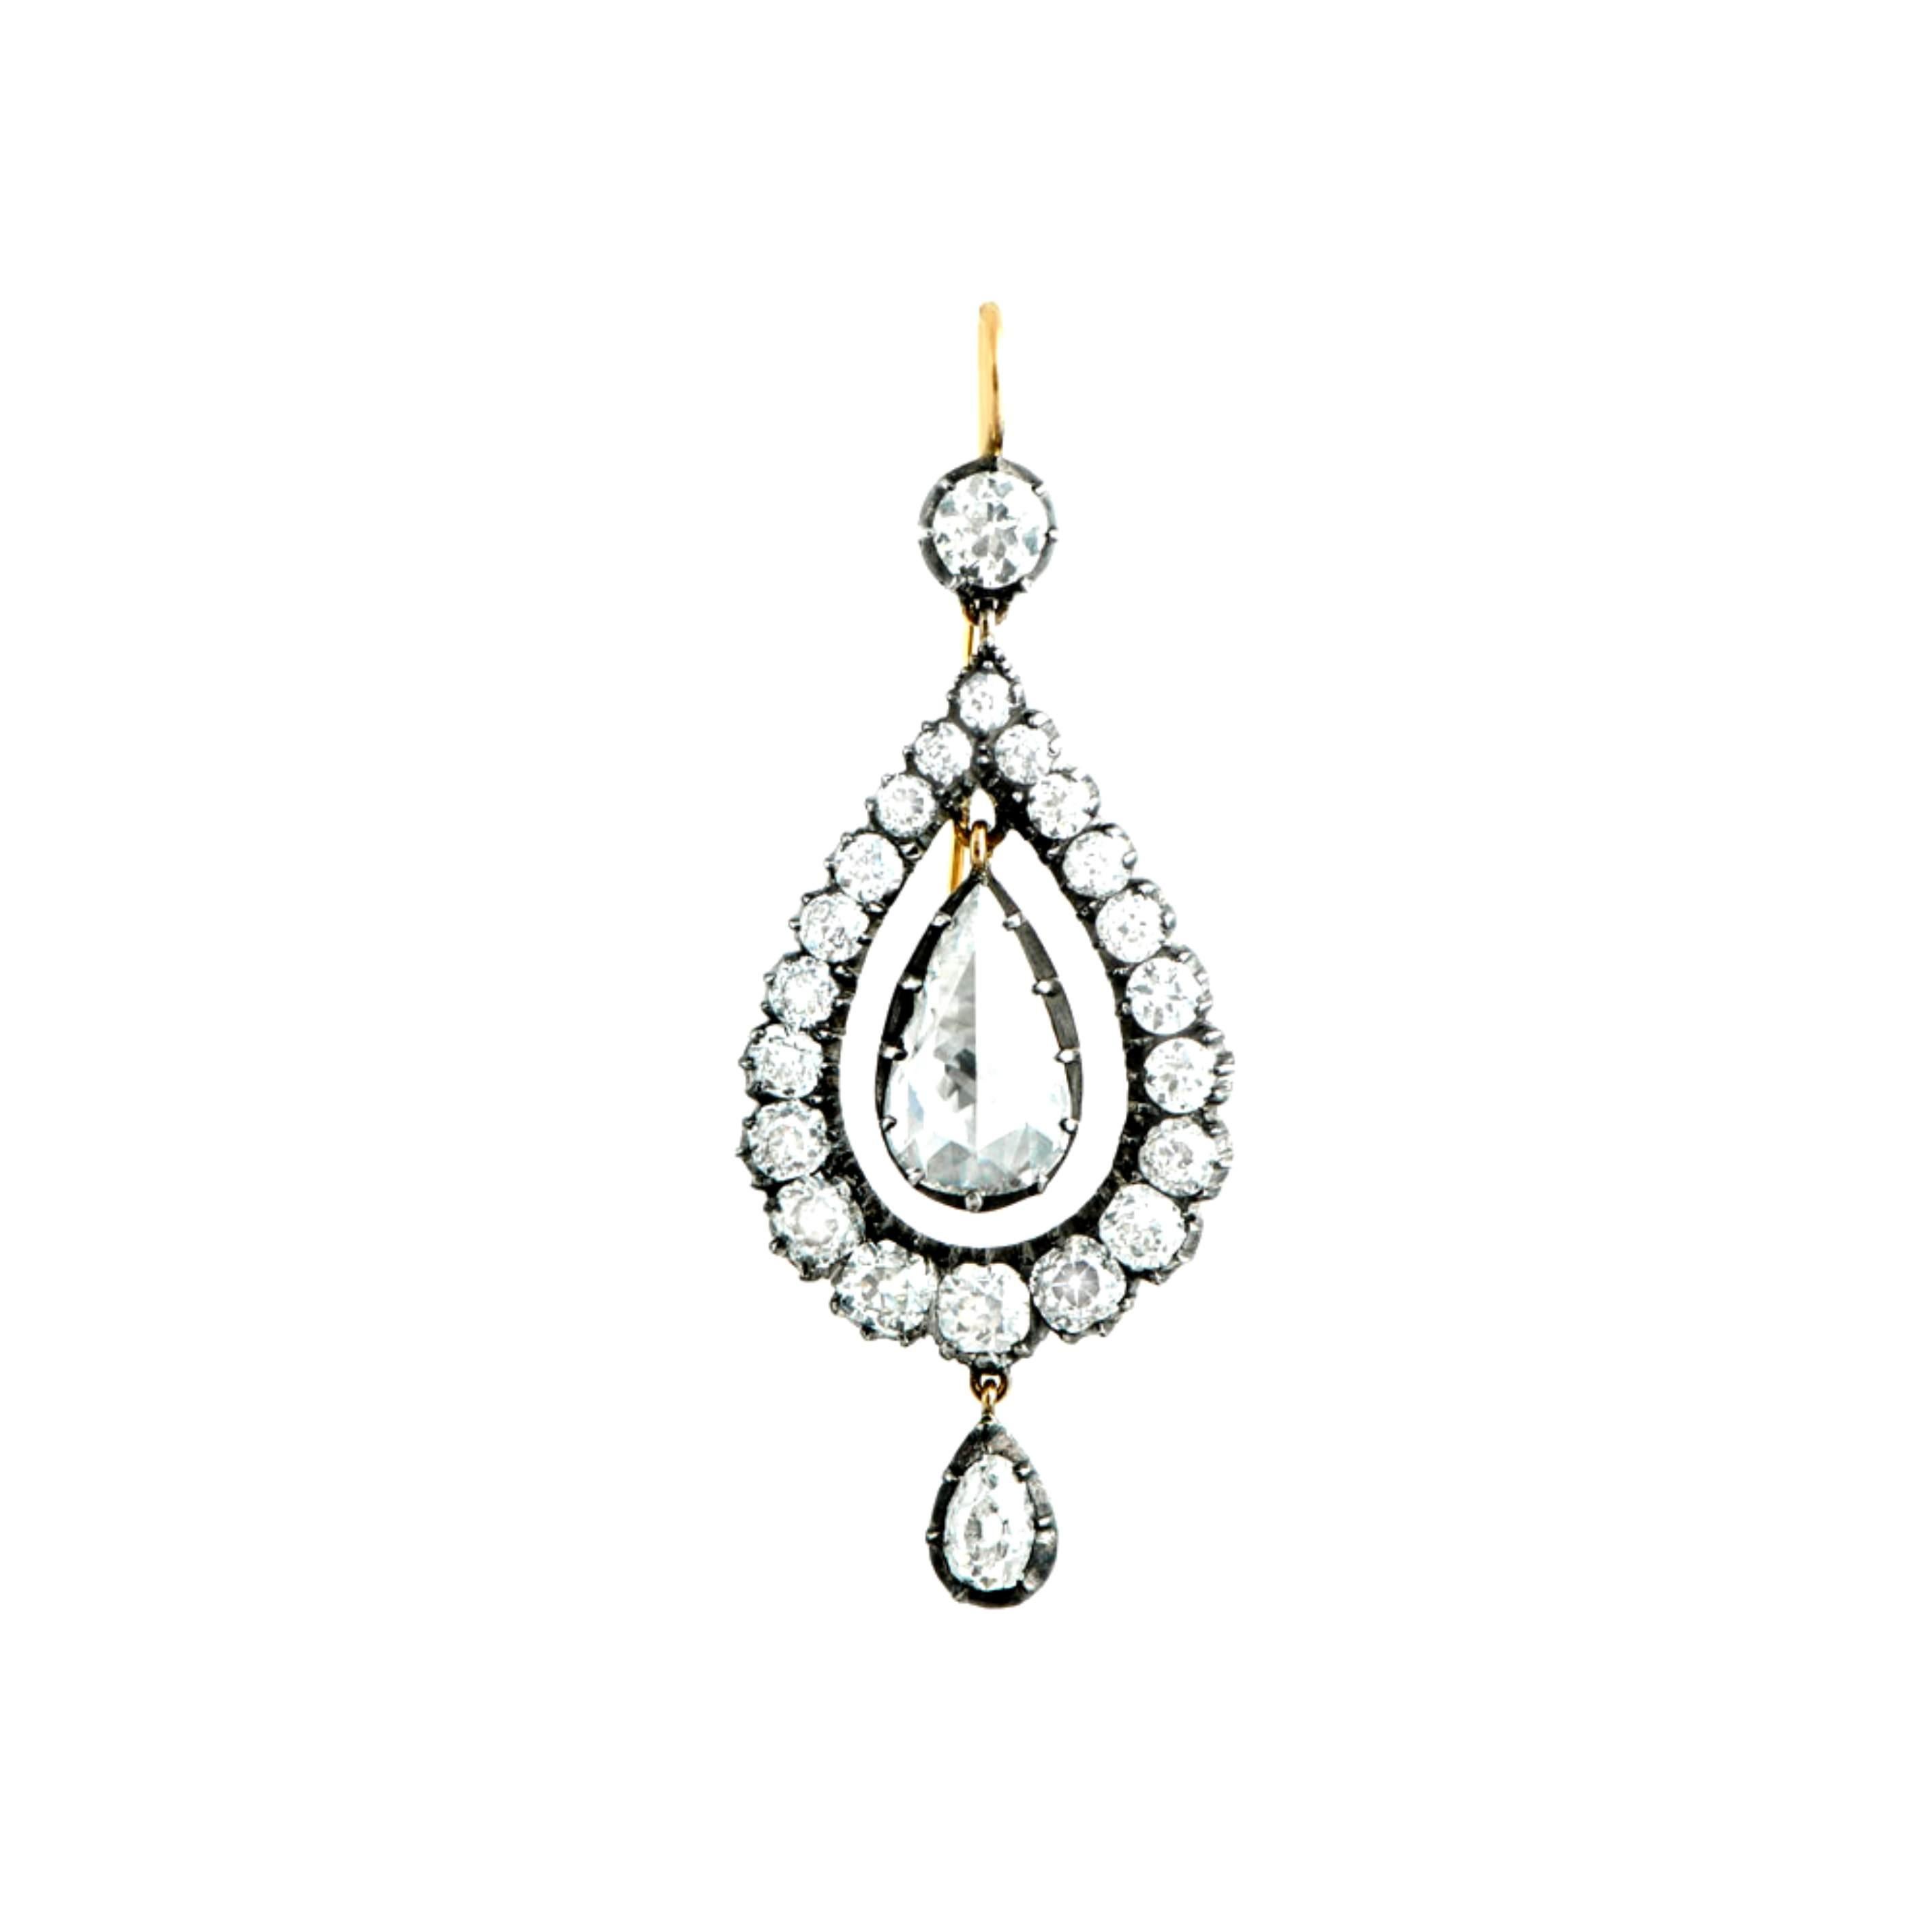 Indulge in the timeless allure of Victorian elegance with these exquisite earrings. Crafted in a silver-on-gold mounting, they boast a captivating display of antique rose-cut diamonds. Each diamond, weighing approximately 4.99 carats, radiates a